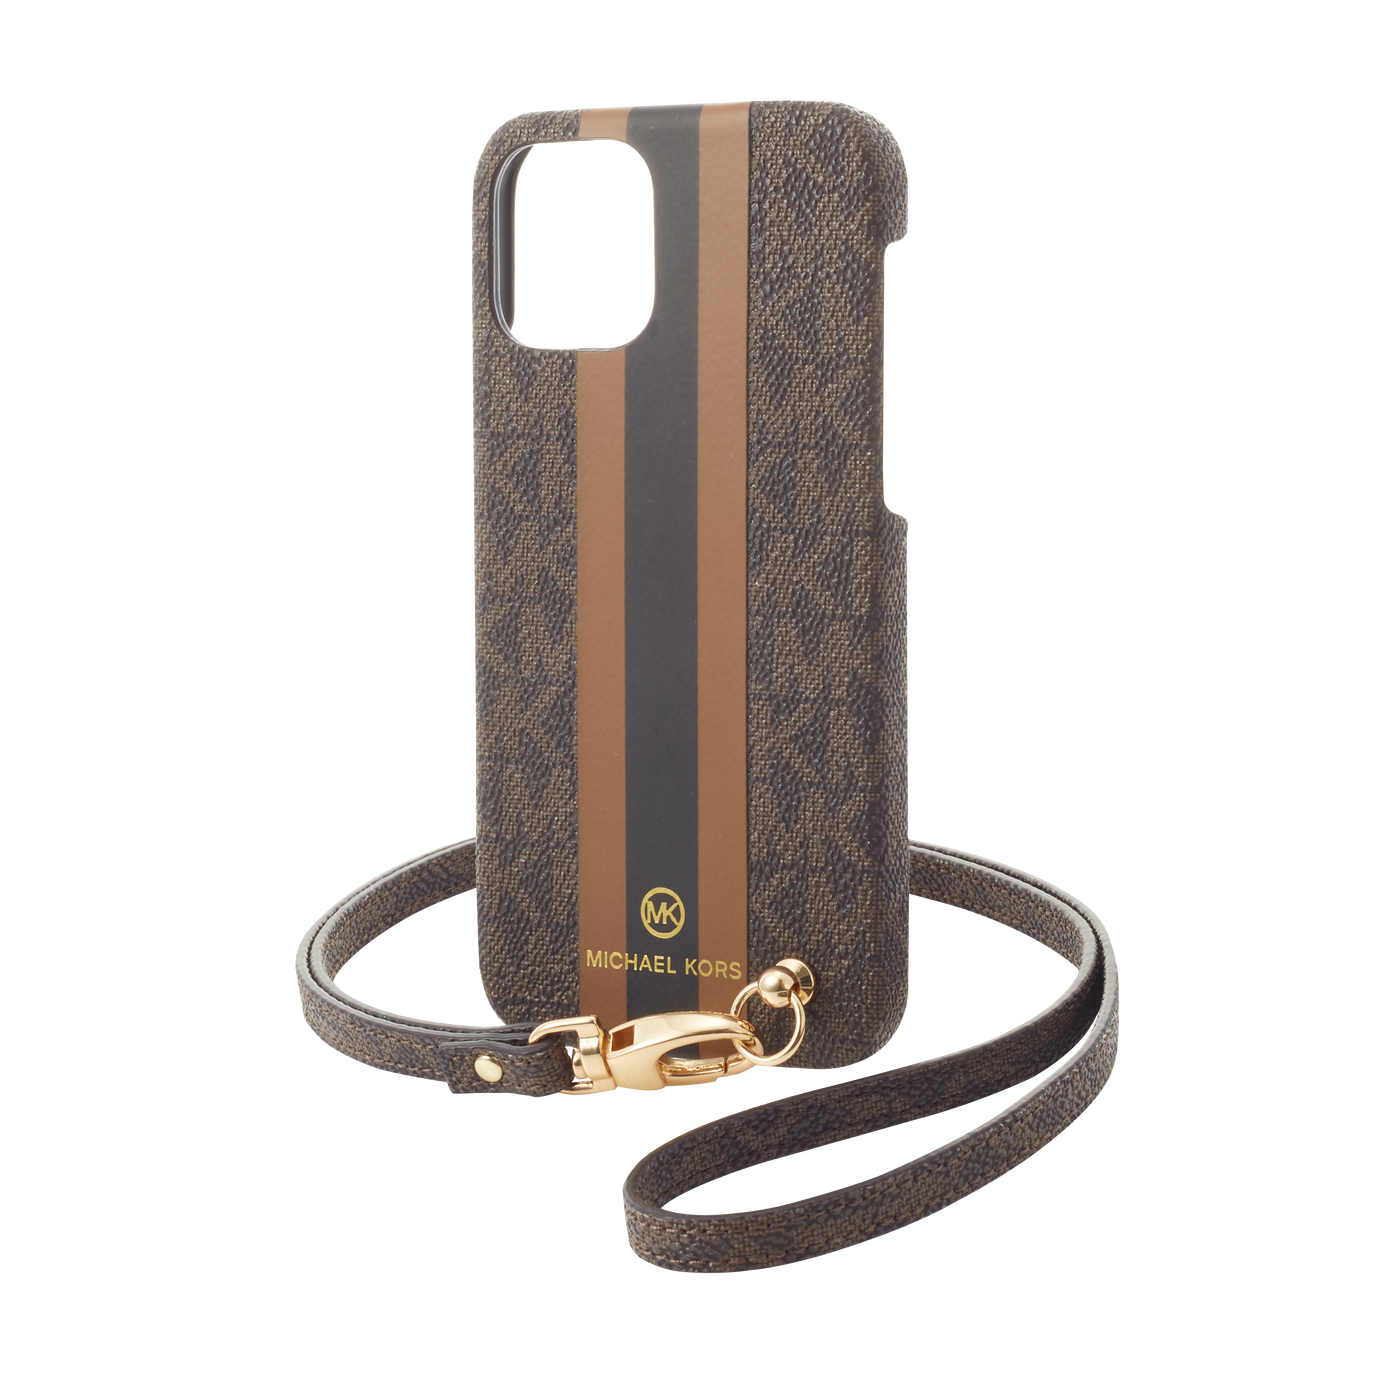 MICHAEL KORS - Slim Wrap Case Stripe with Neck Strap - Magsafe for iPhone 12 mini - Brown